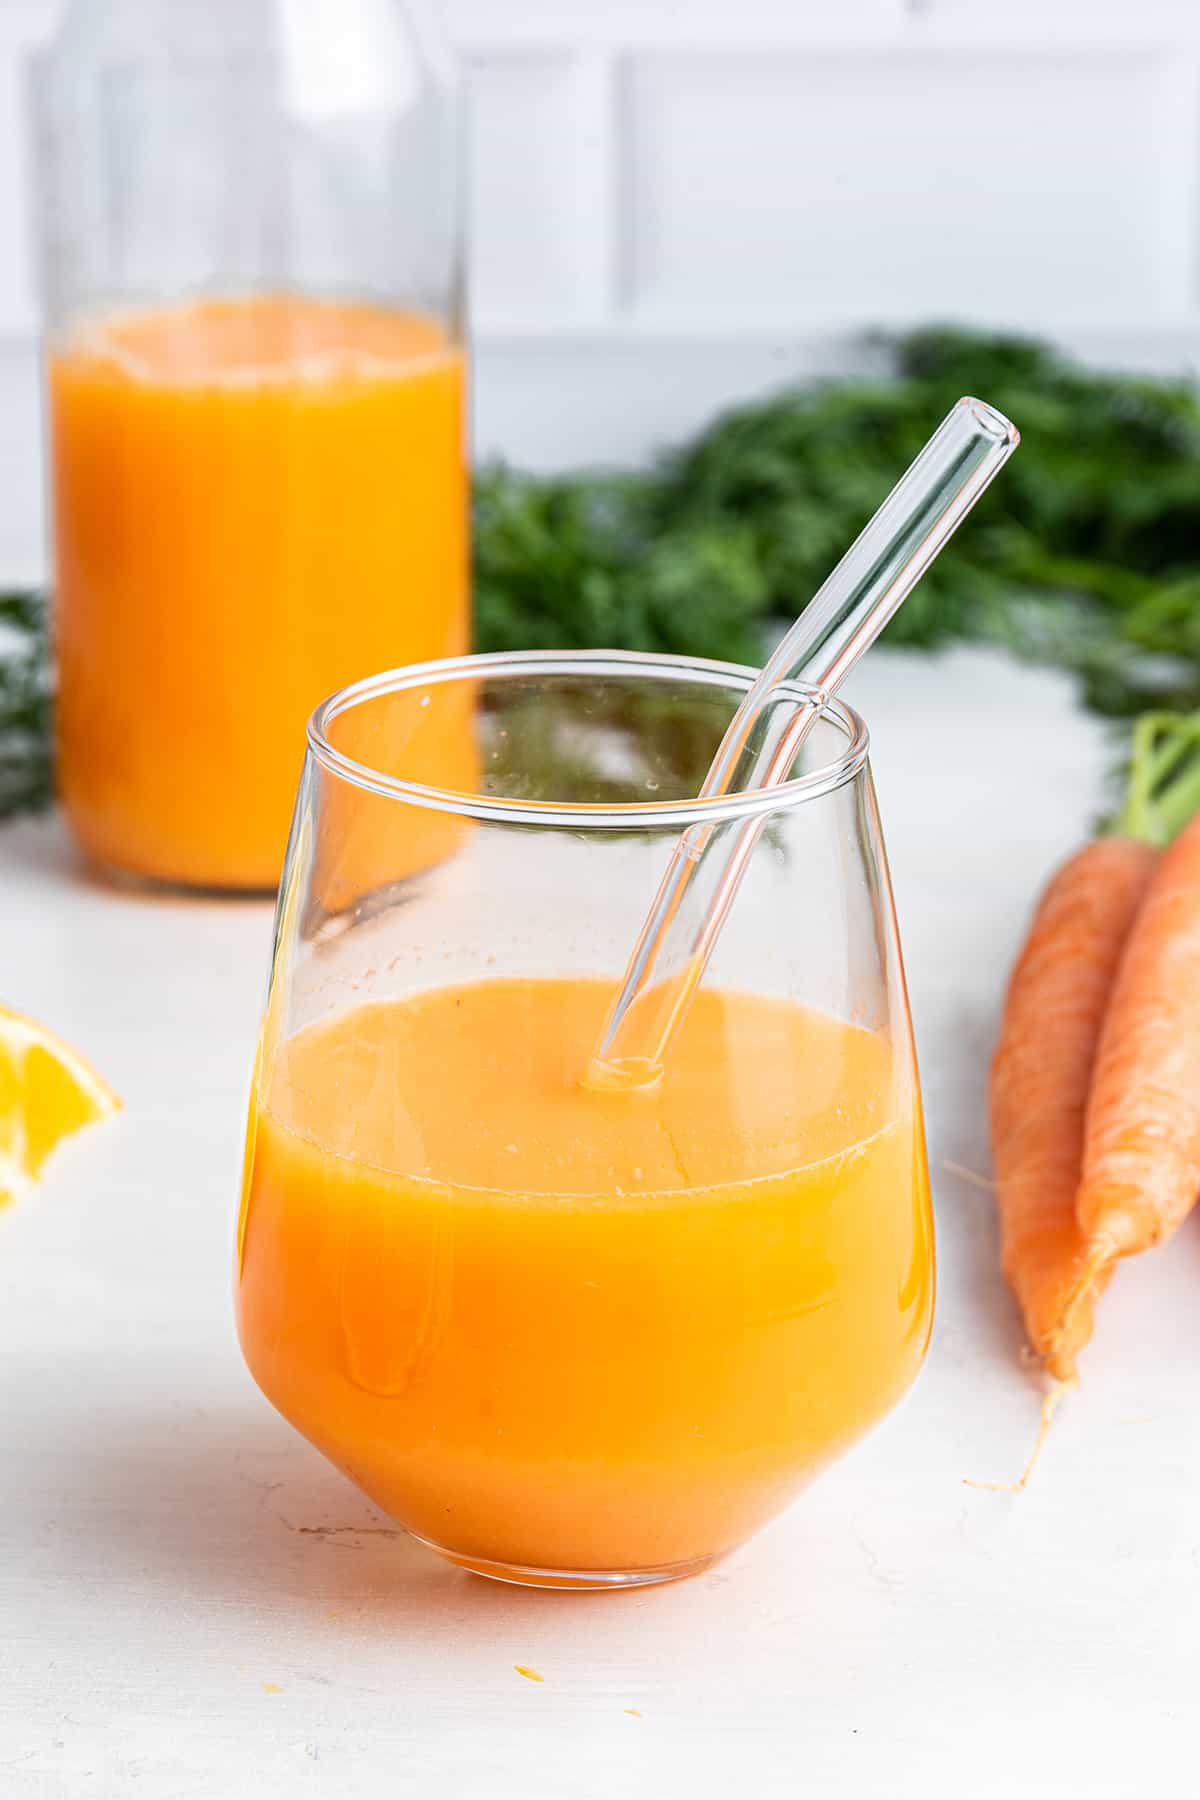 Glass of carrot juice with glass straw, with bottle of juice and bunch of carrots in background